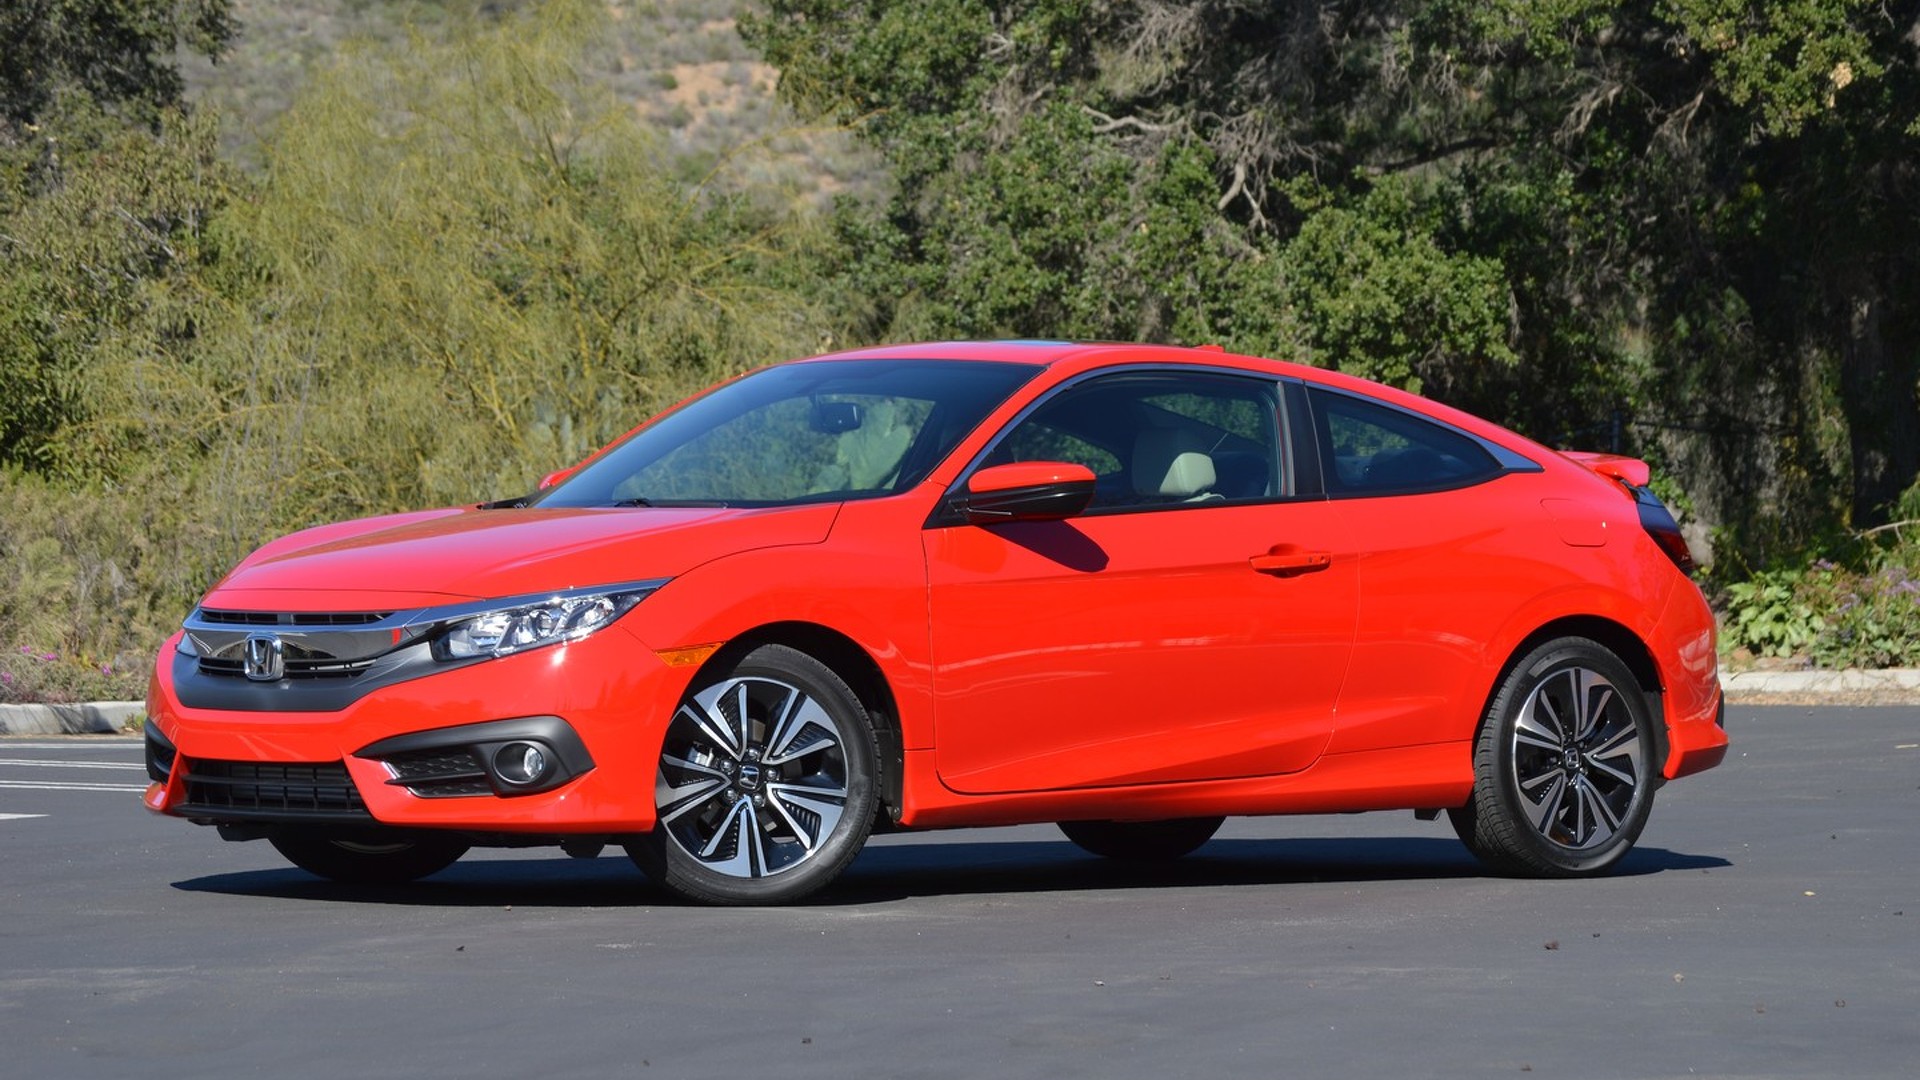 First Drive: 2016 Honda Civic Coupe [Video]